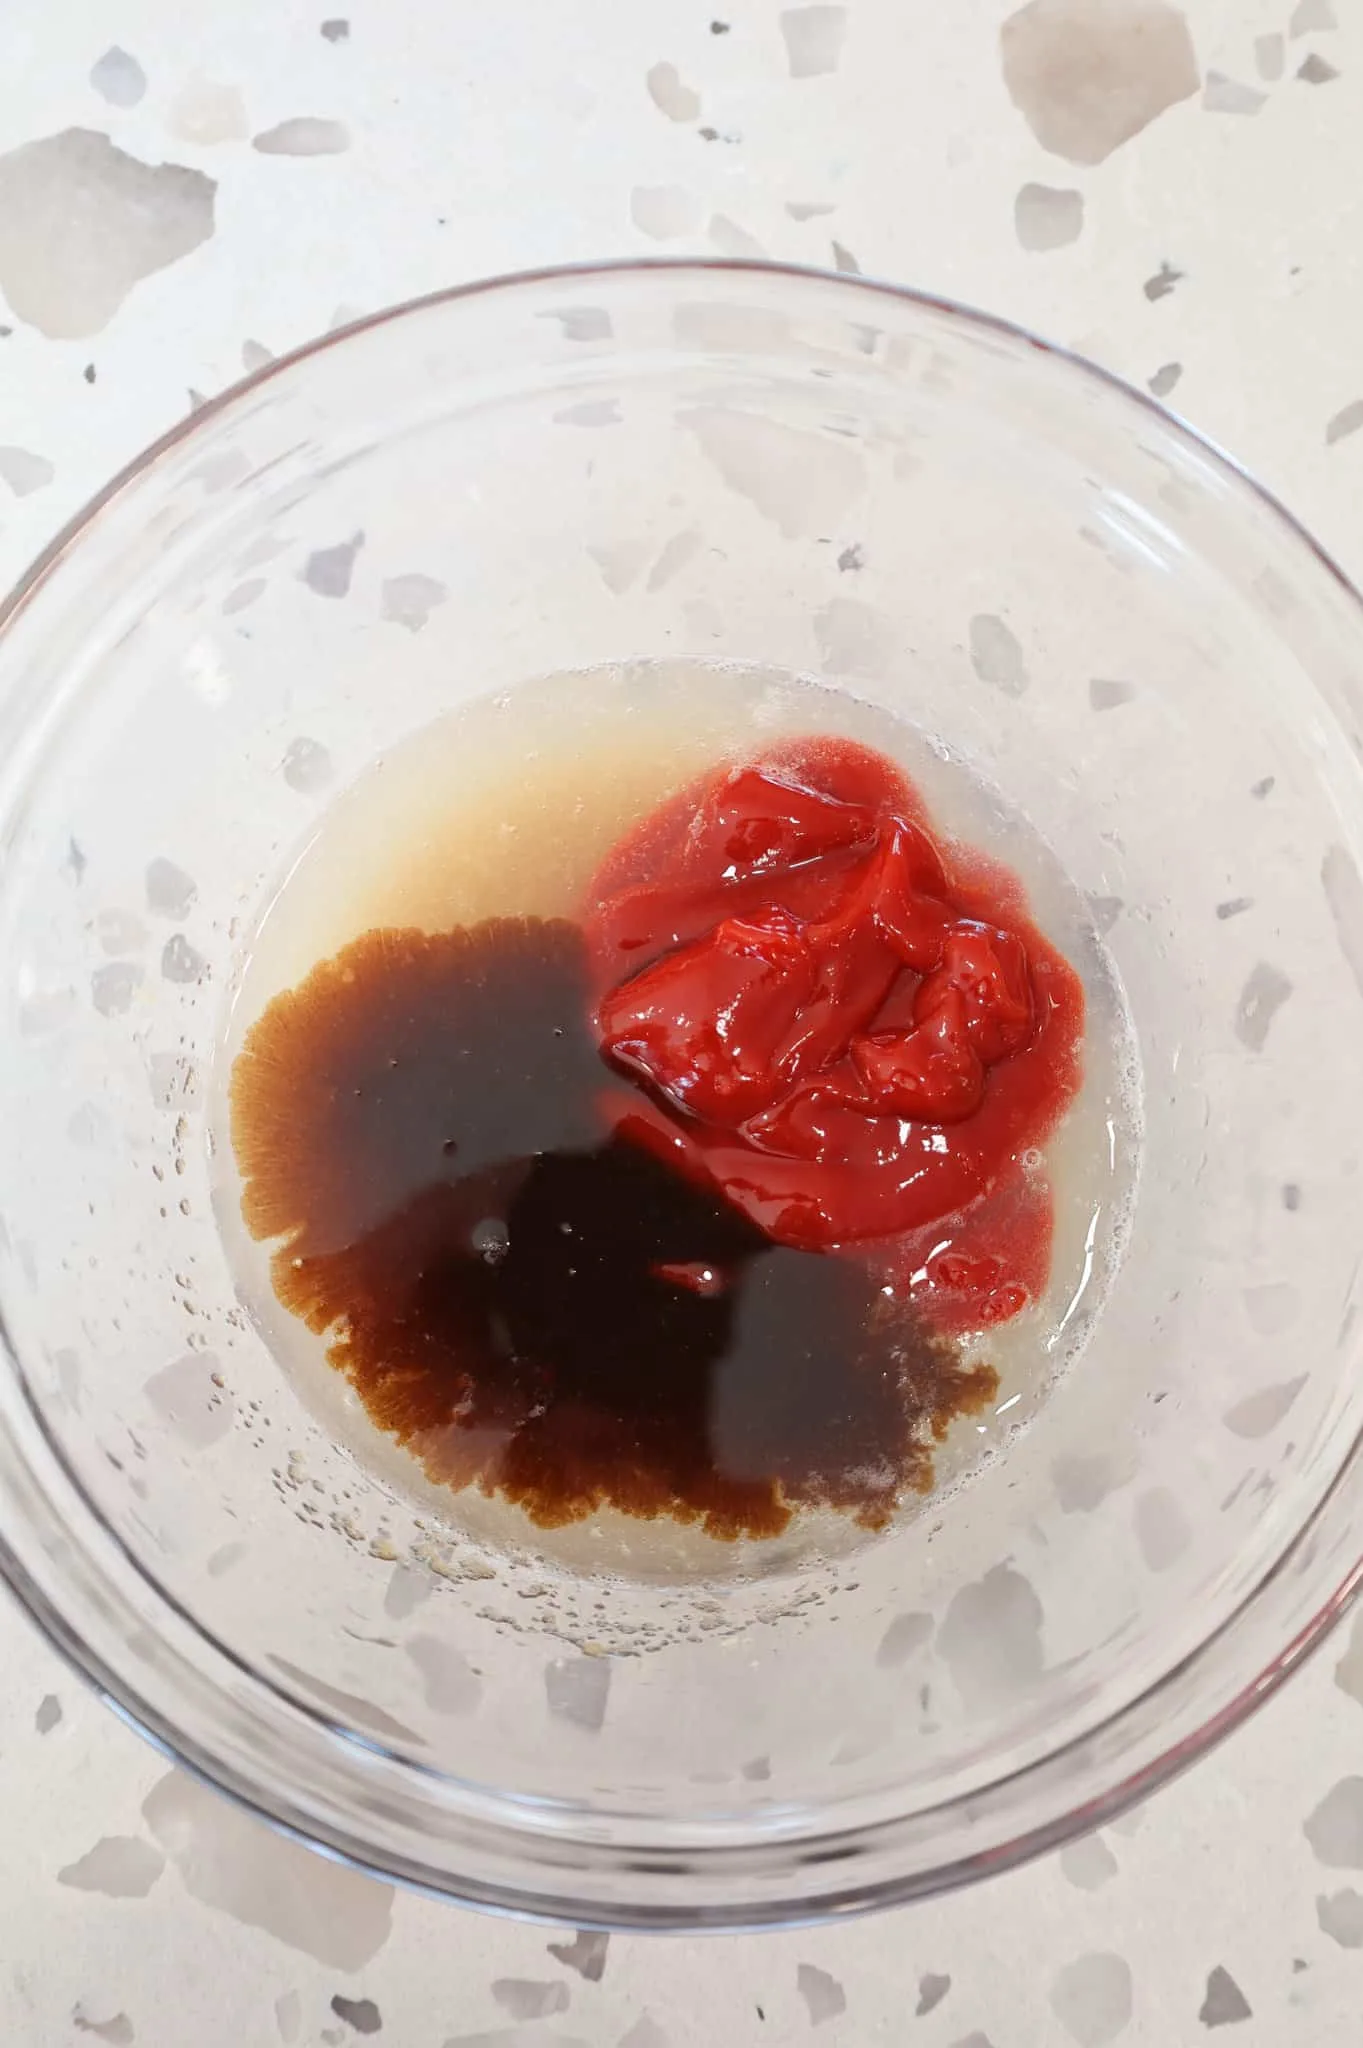 lemonade concentrate, Worcestershire sauce and ketchup in a mixing bowl